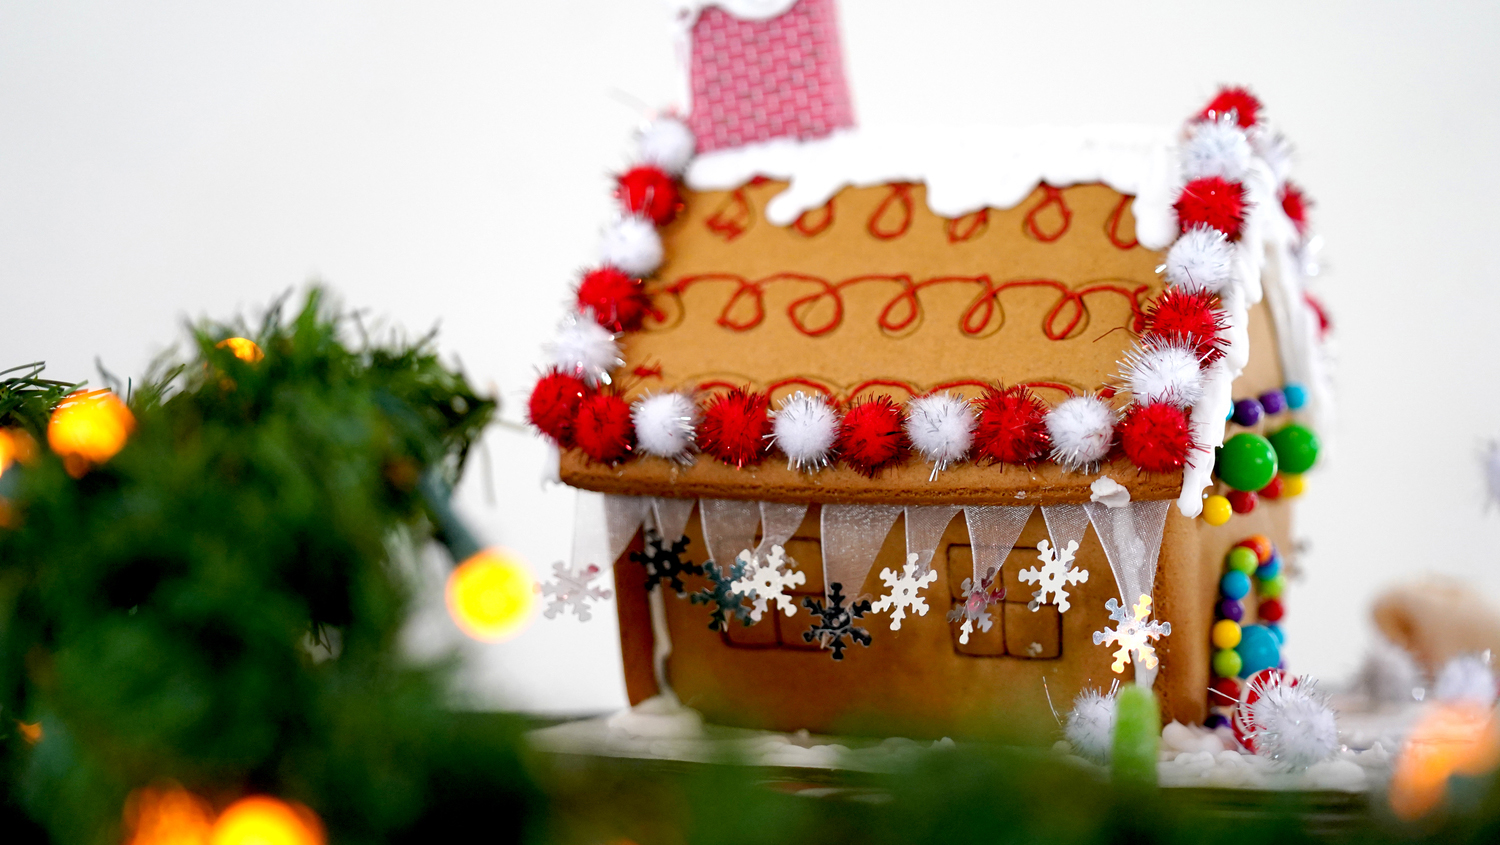 Gingerbread house next to greenery with yellow lights